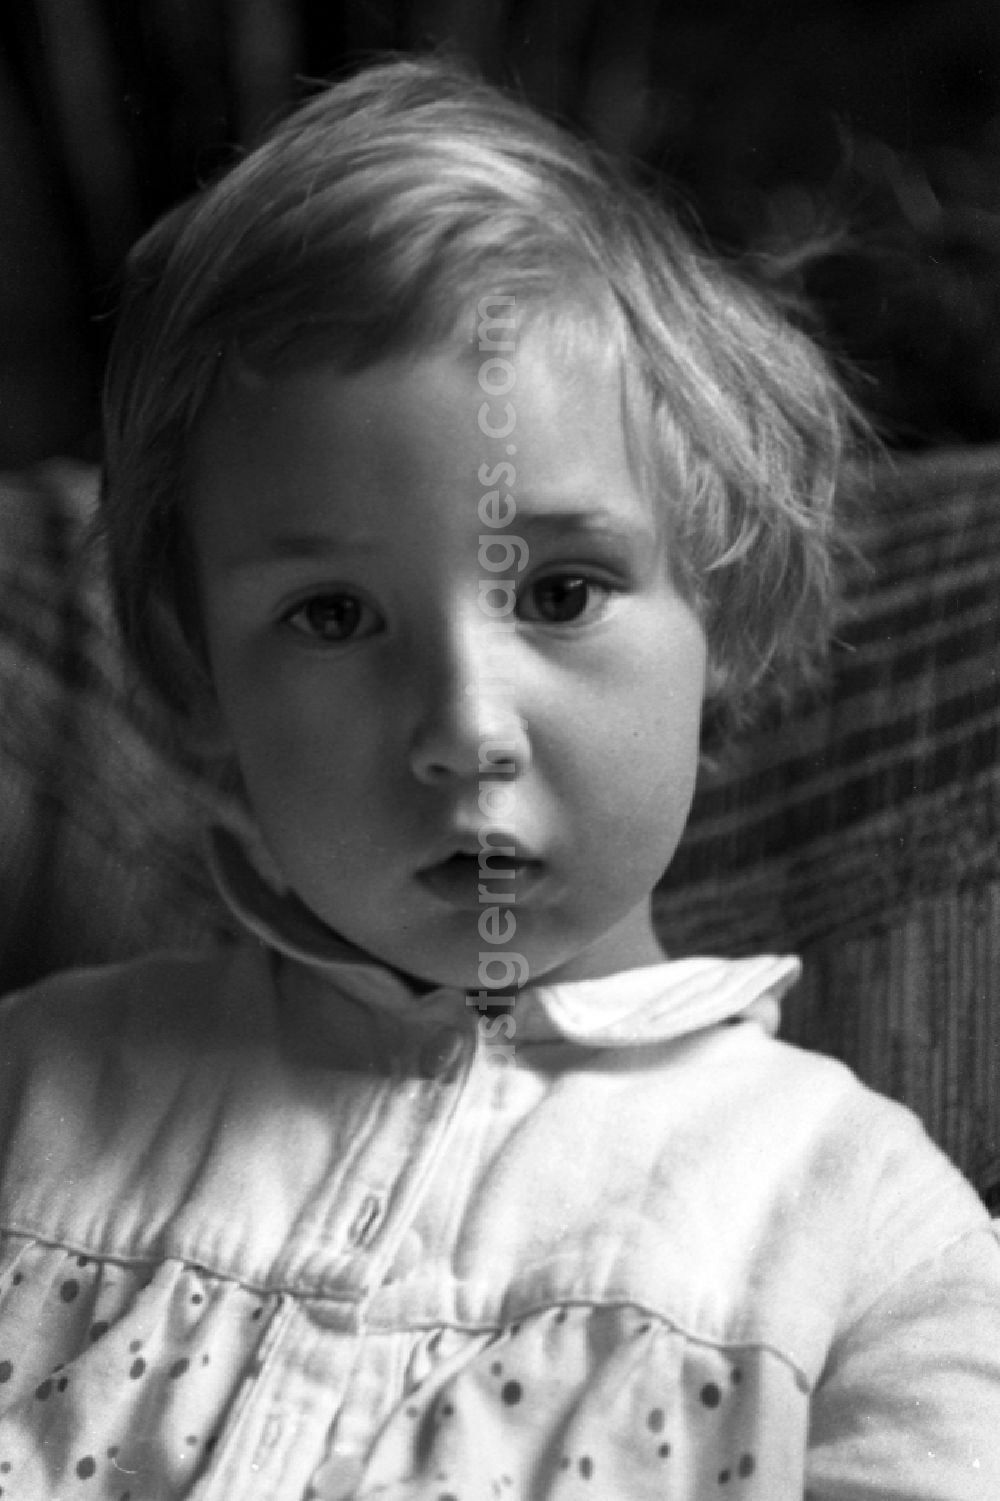 GDR photo archive: Merseburg - Child in the portrait in Merseburg in the federal state Saxony-Anhalt in the area of the former GDR, German democratic republic